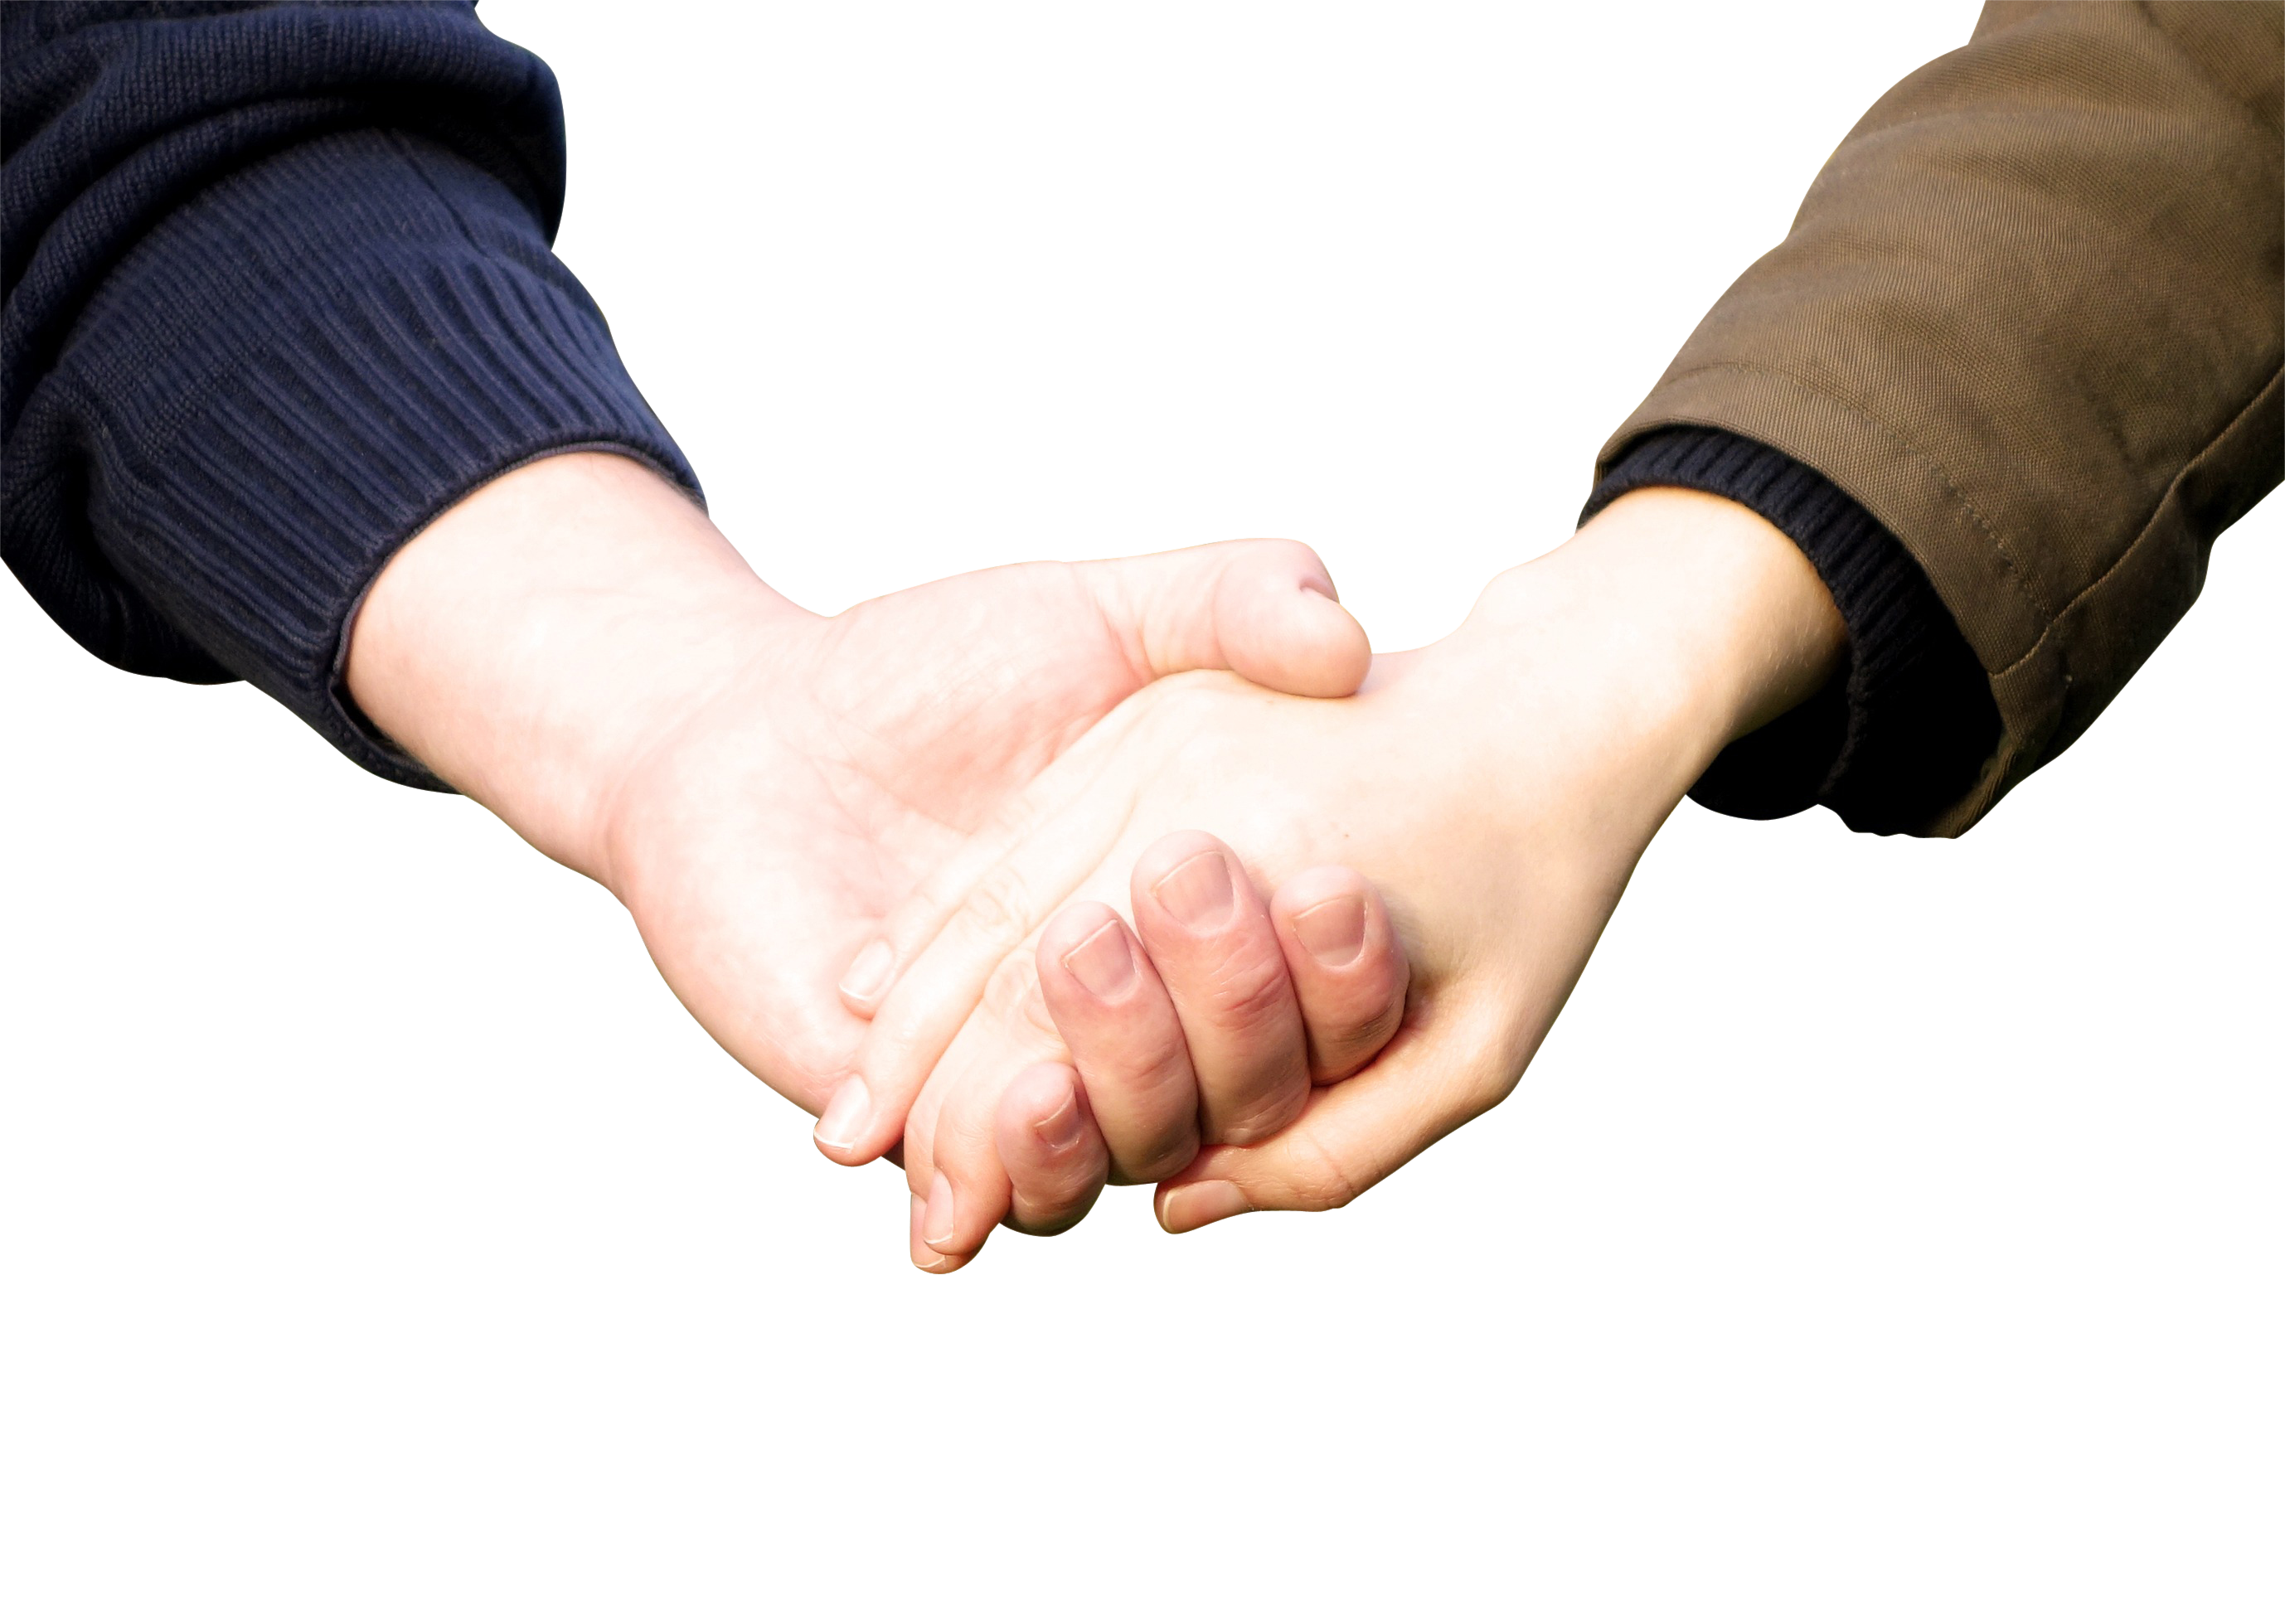 Holding Hands PNG Image